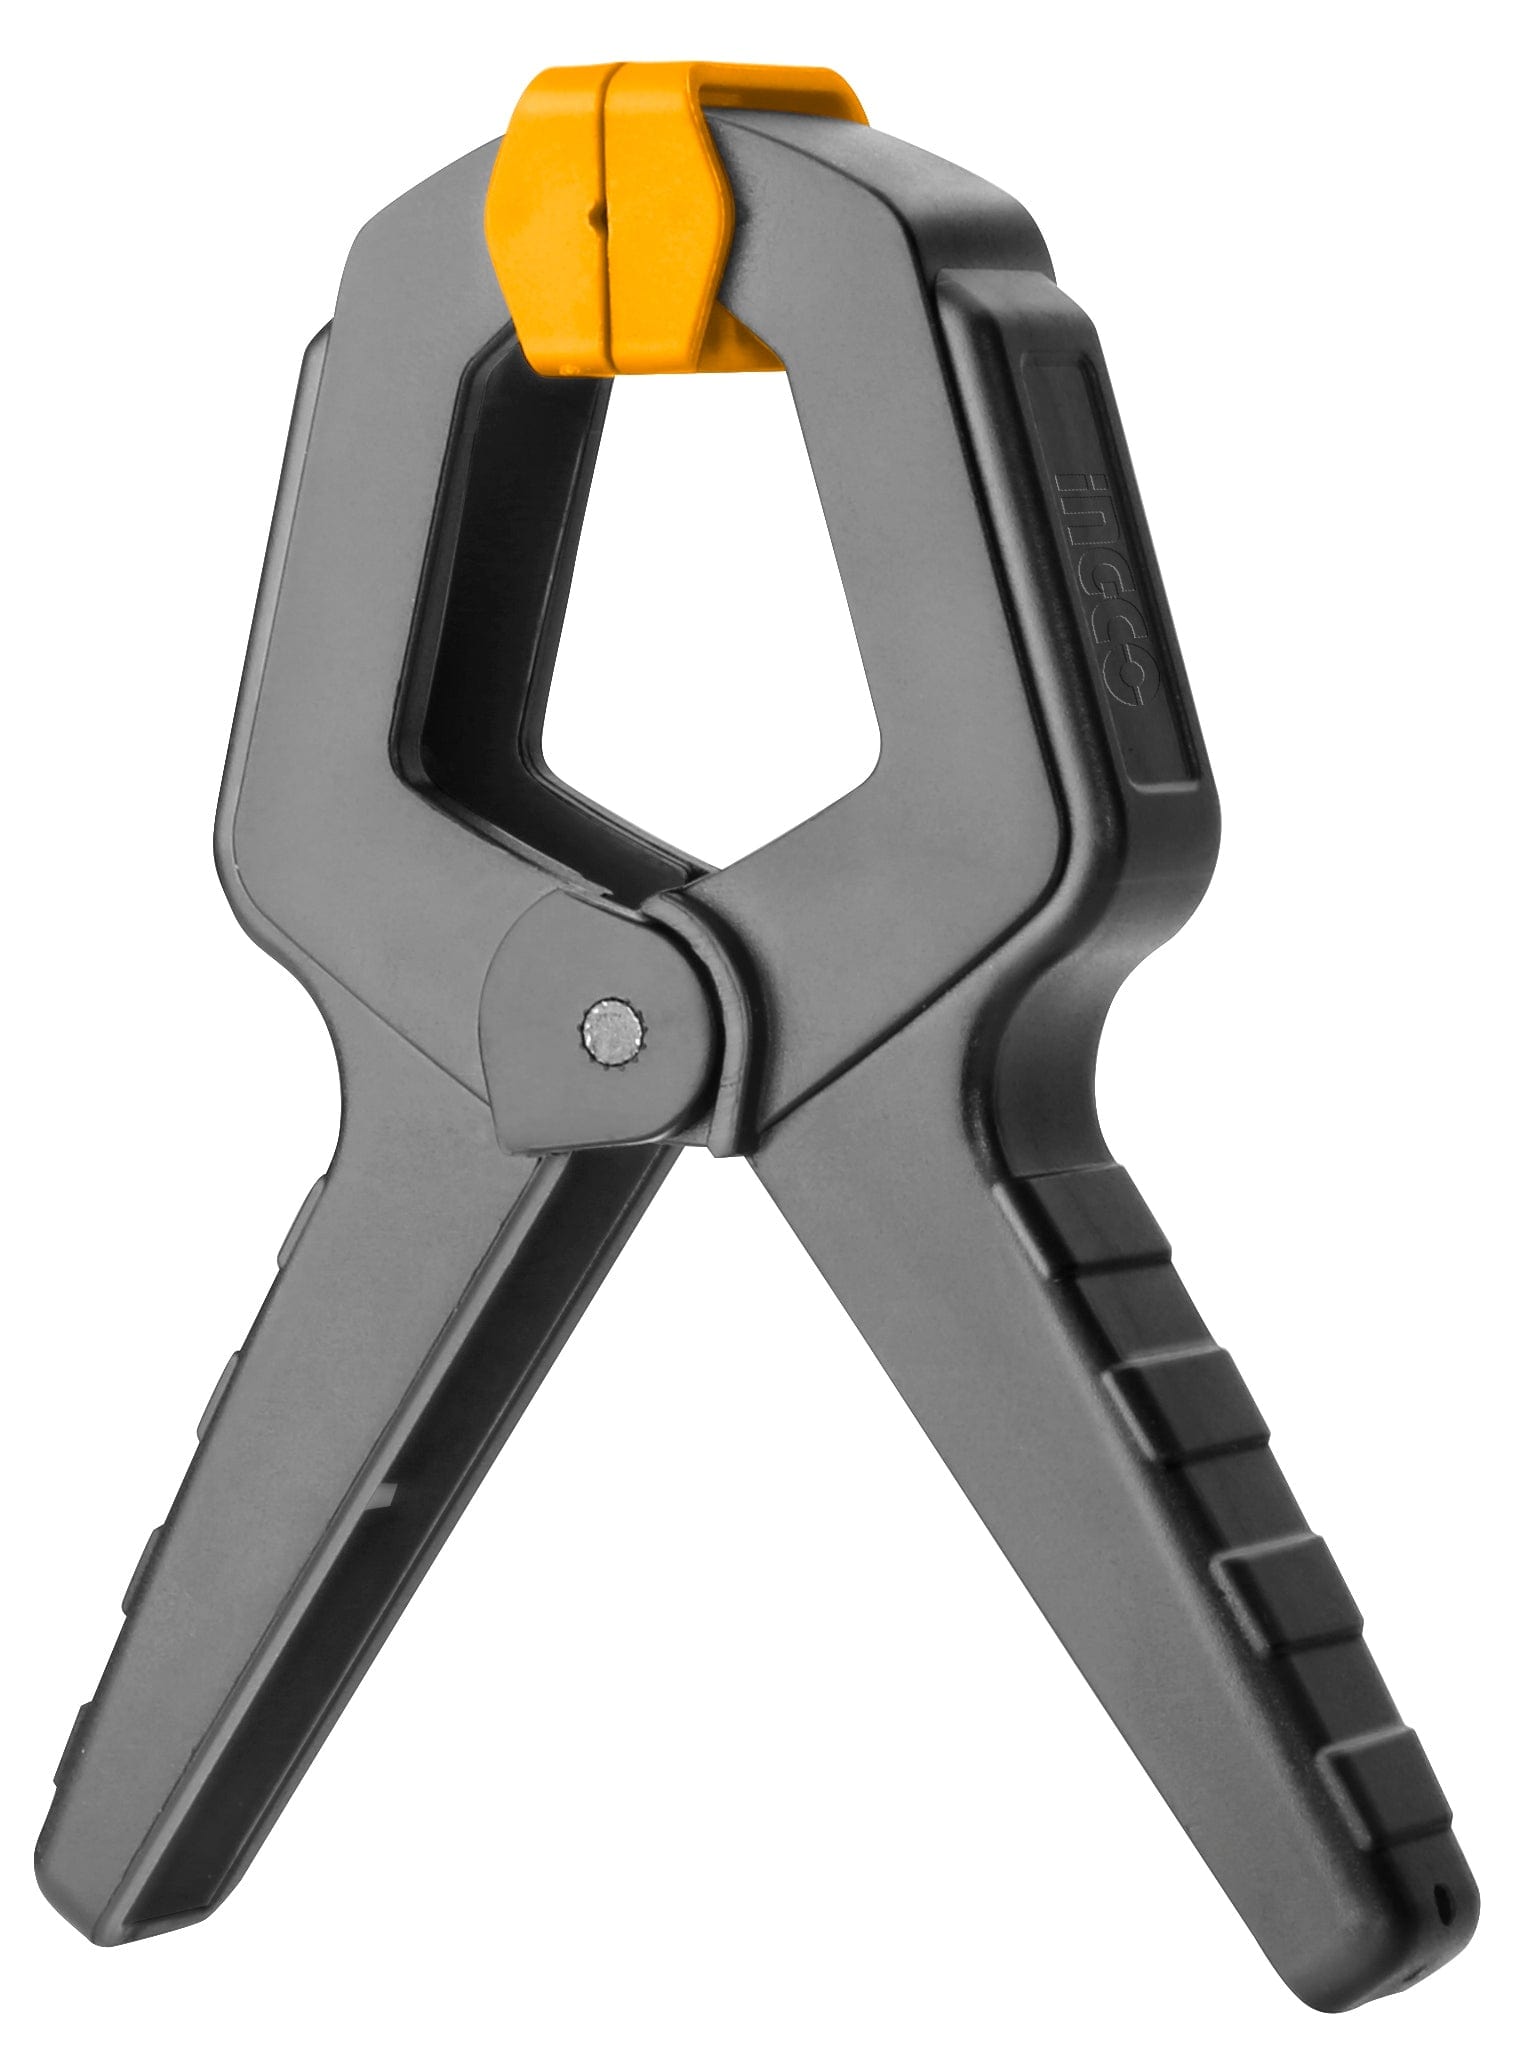 Ingco 6" Spring Clamp - HQSC0206 | Supply Master Accra, Ghana Vices & Clamps Buy Tools hardware Building materials